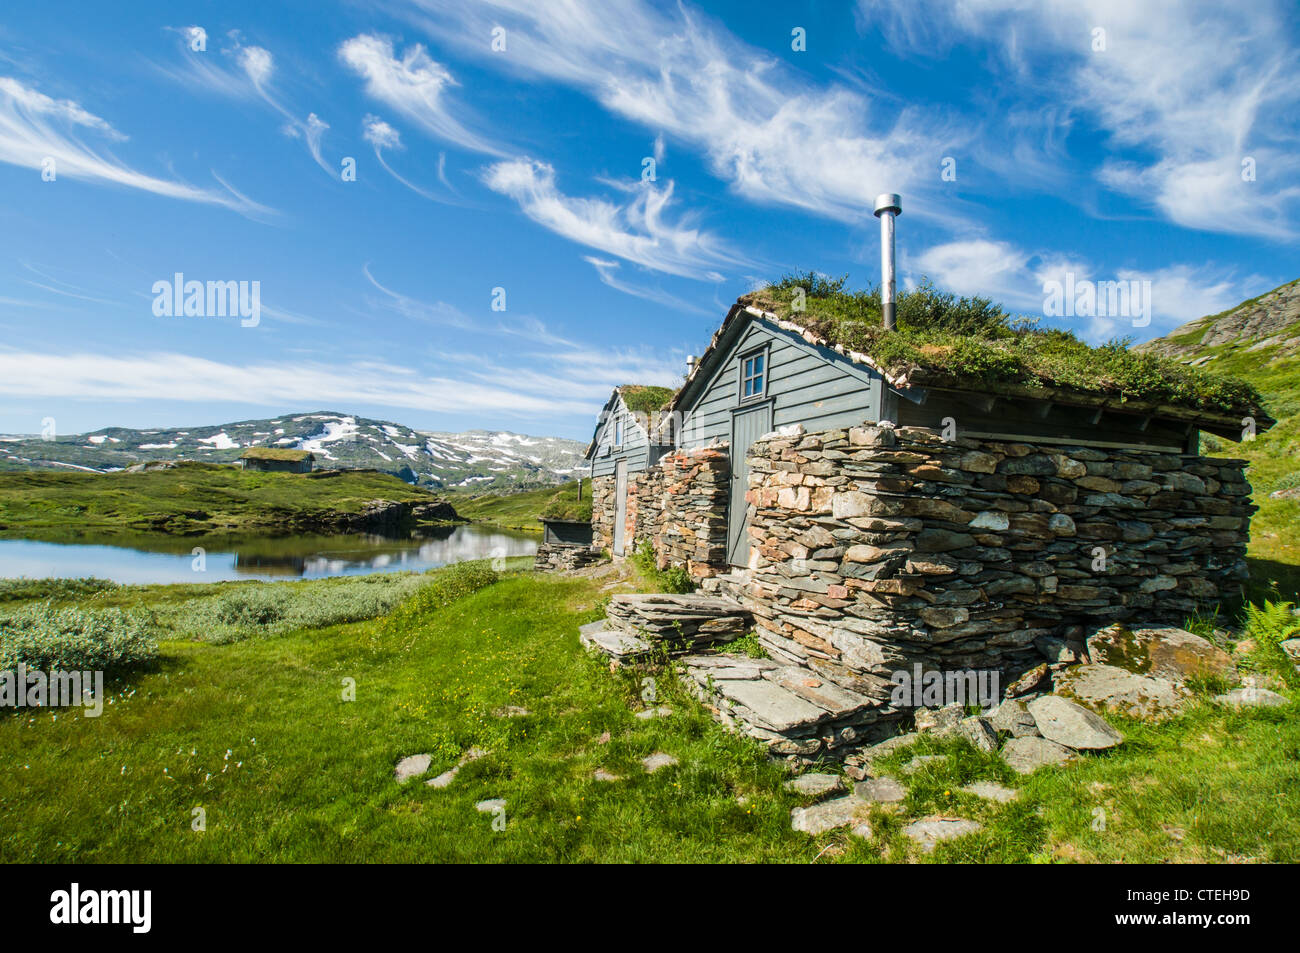 Huts made of stone and wood on the Hardangervidda, a high plateau in Norway Stock Photo